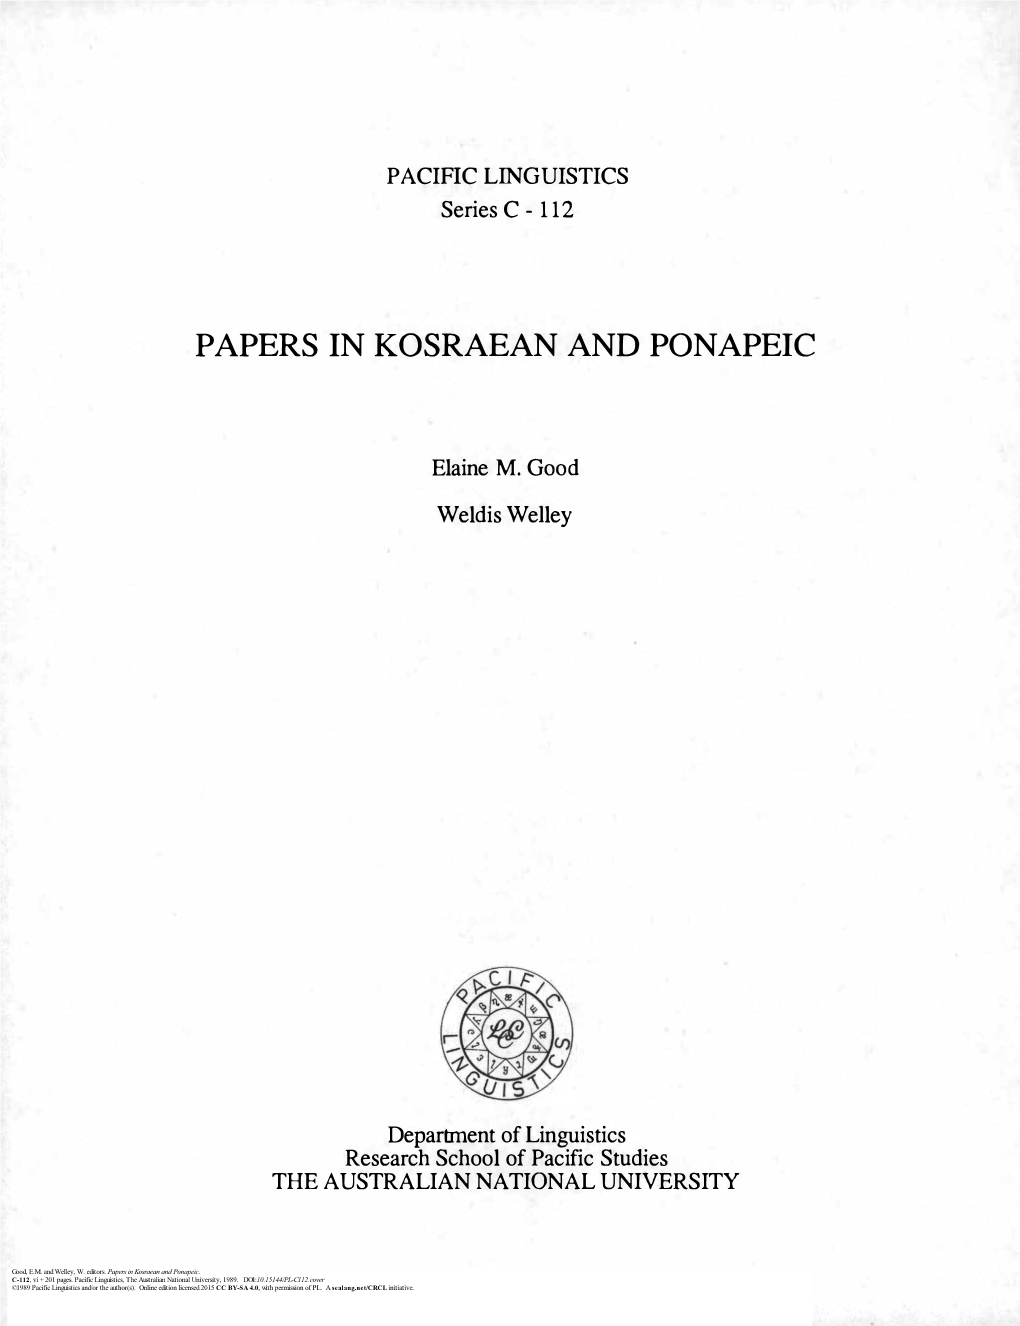 Papers in Kosraean and Ponapeic